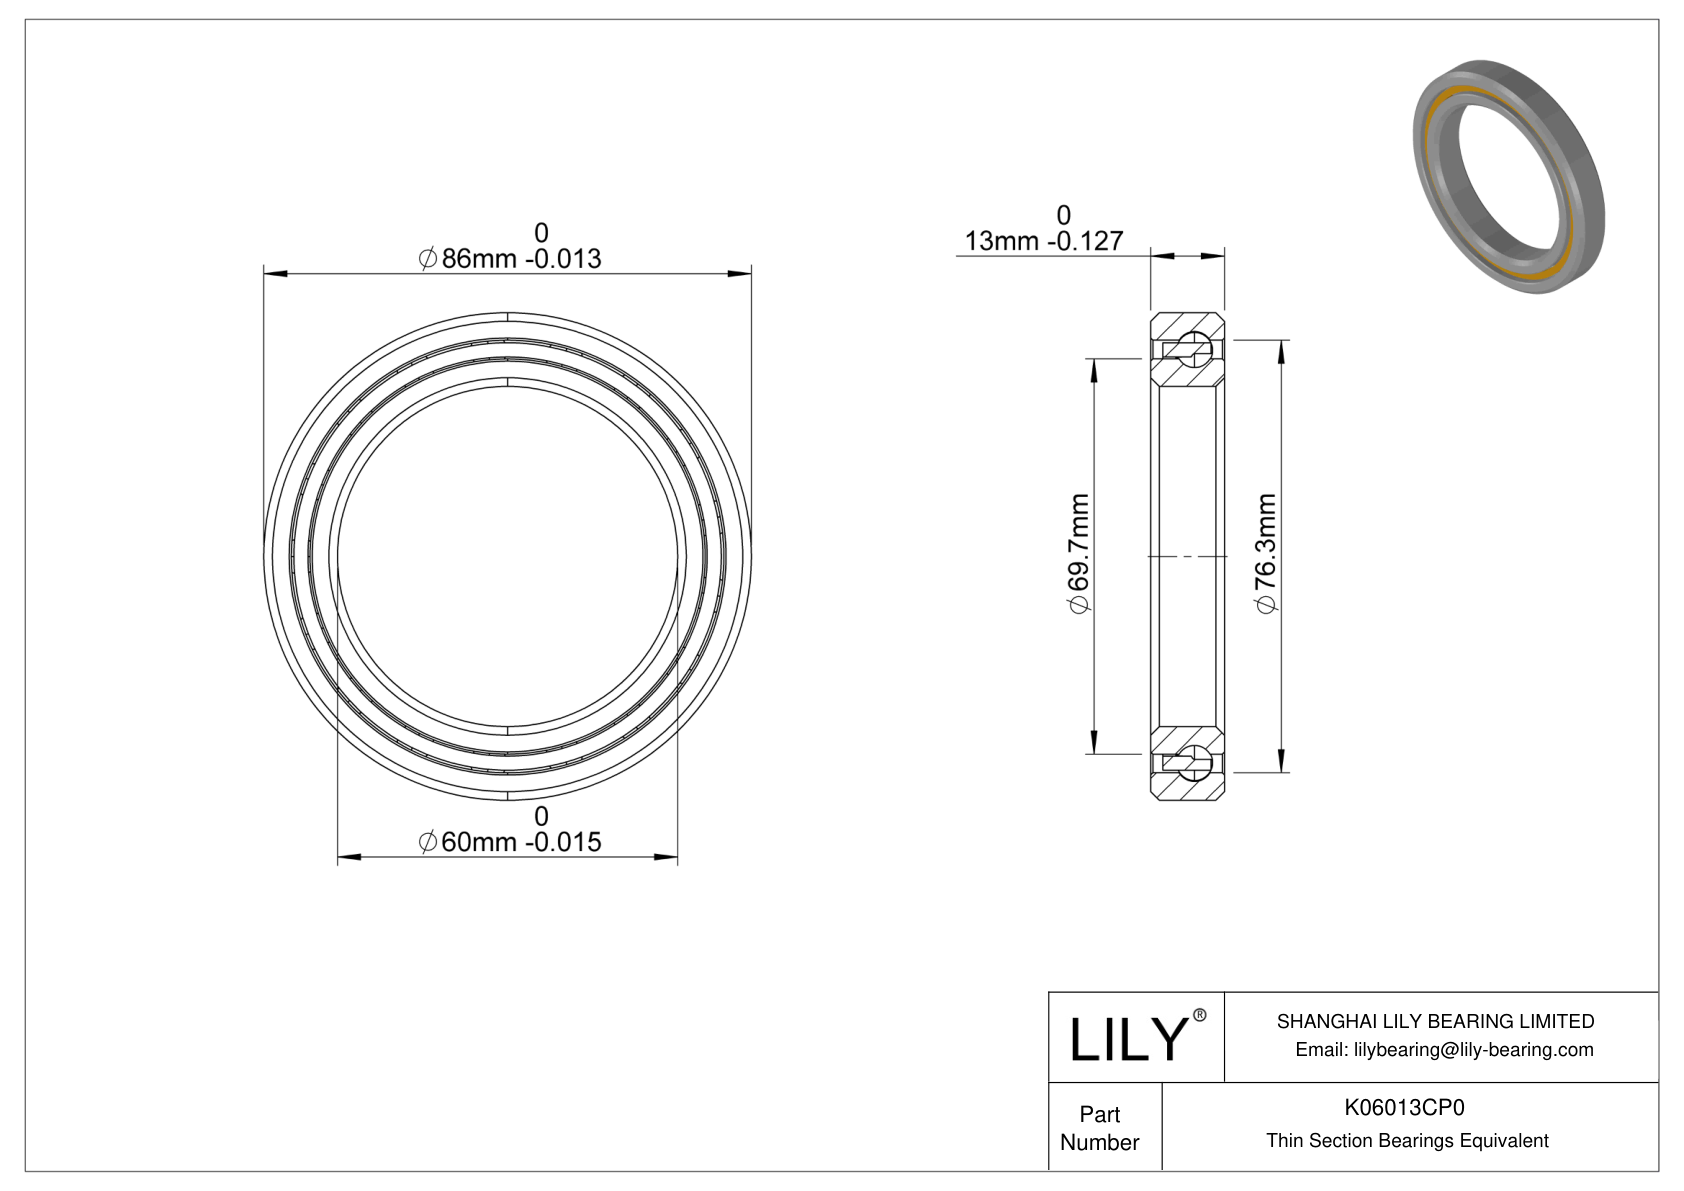 K06013CP0 Constant Section (CS) Bearings cad drawing